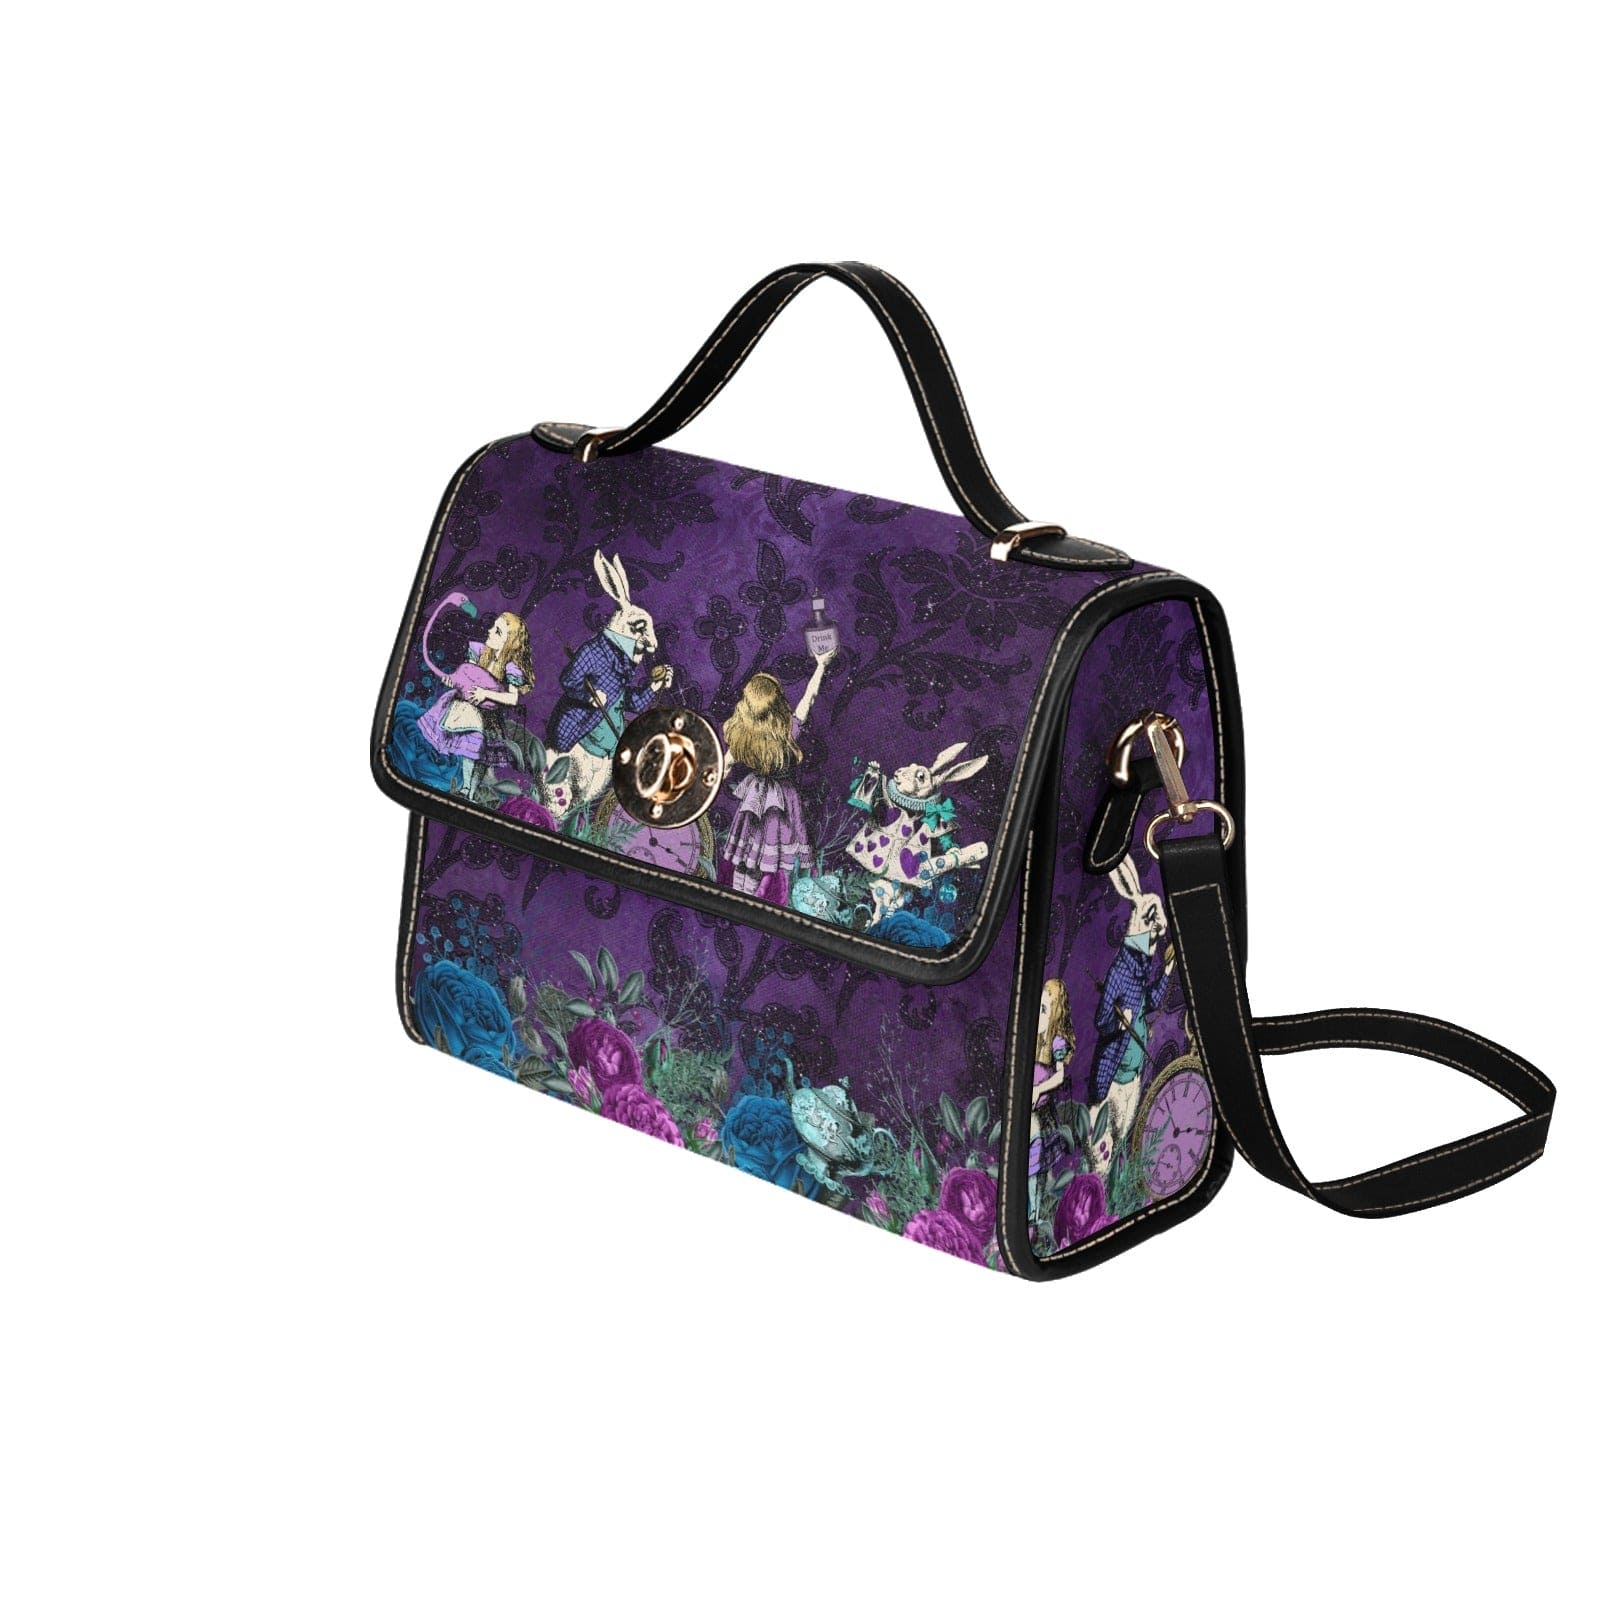 side front view showing the black faux leather strap and handle of the Purple damask background on an Alice in wonderland themed gothic satchel handbag featuring the White Rabbit at Gallery Serpentine